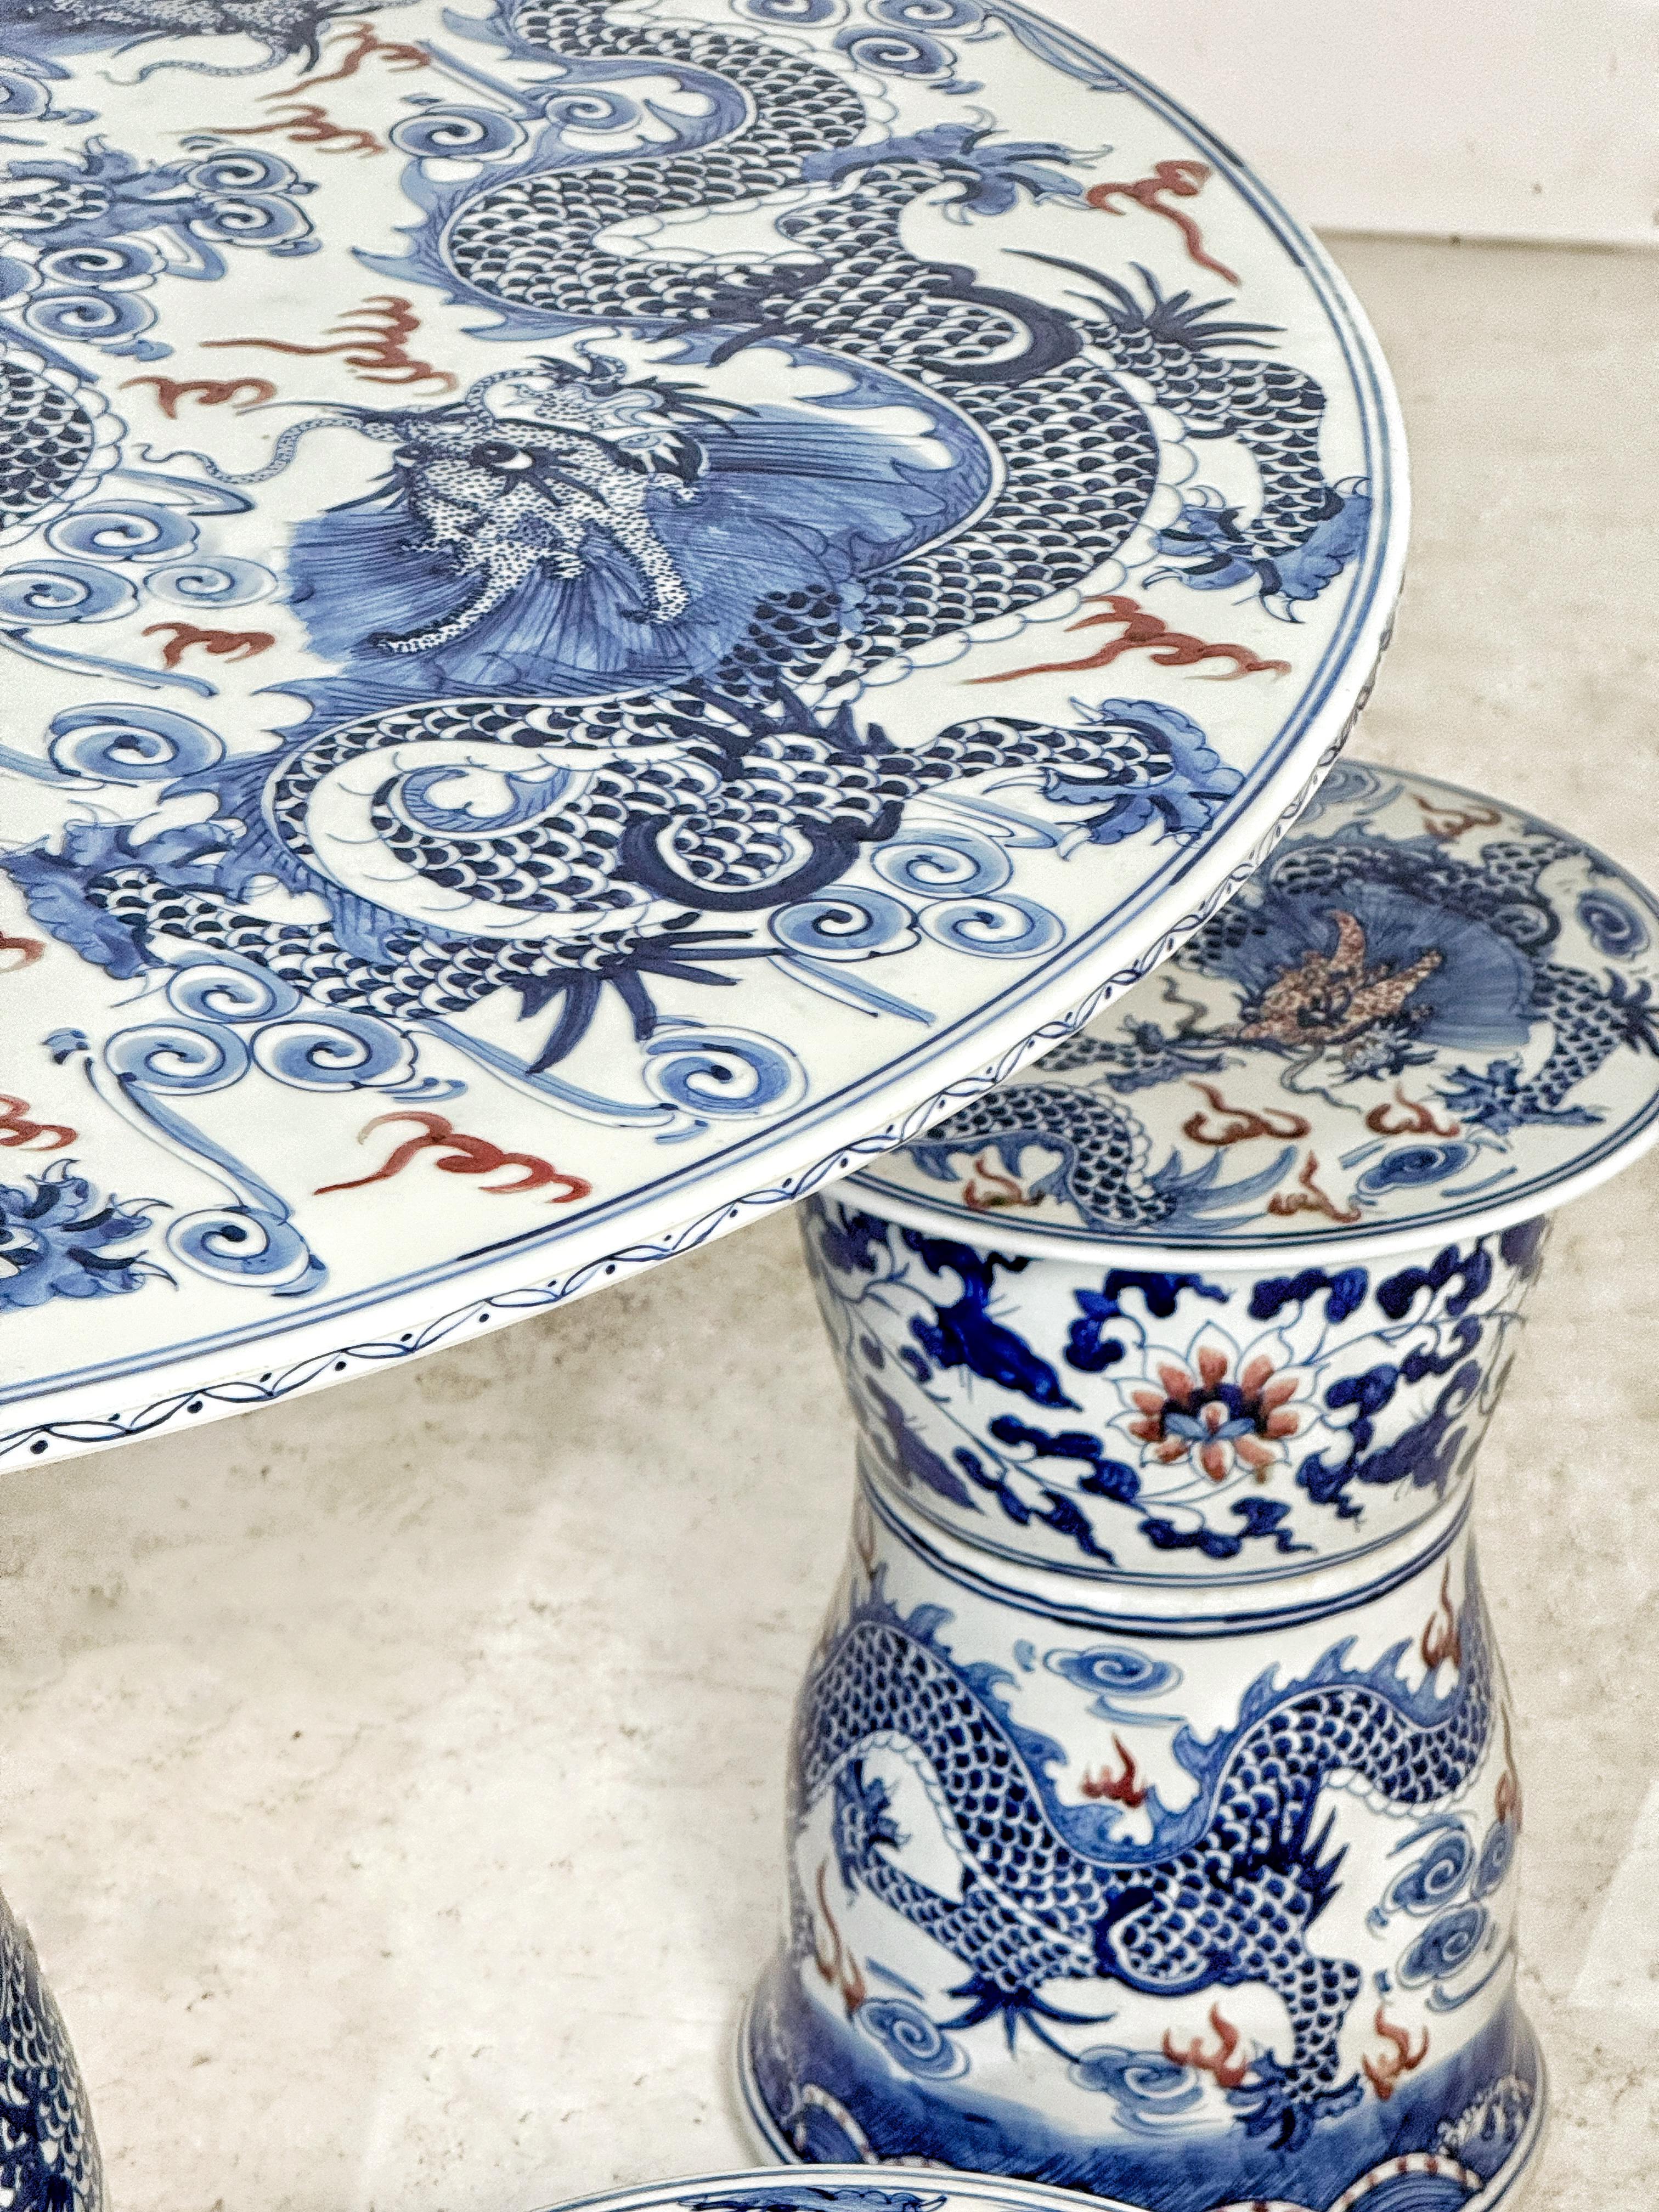 Vintage Chinese Ceramic Table Set In Good Condition For Sale In Sint-Niklaas, VOV